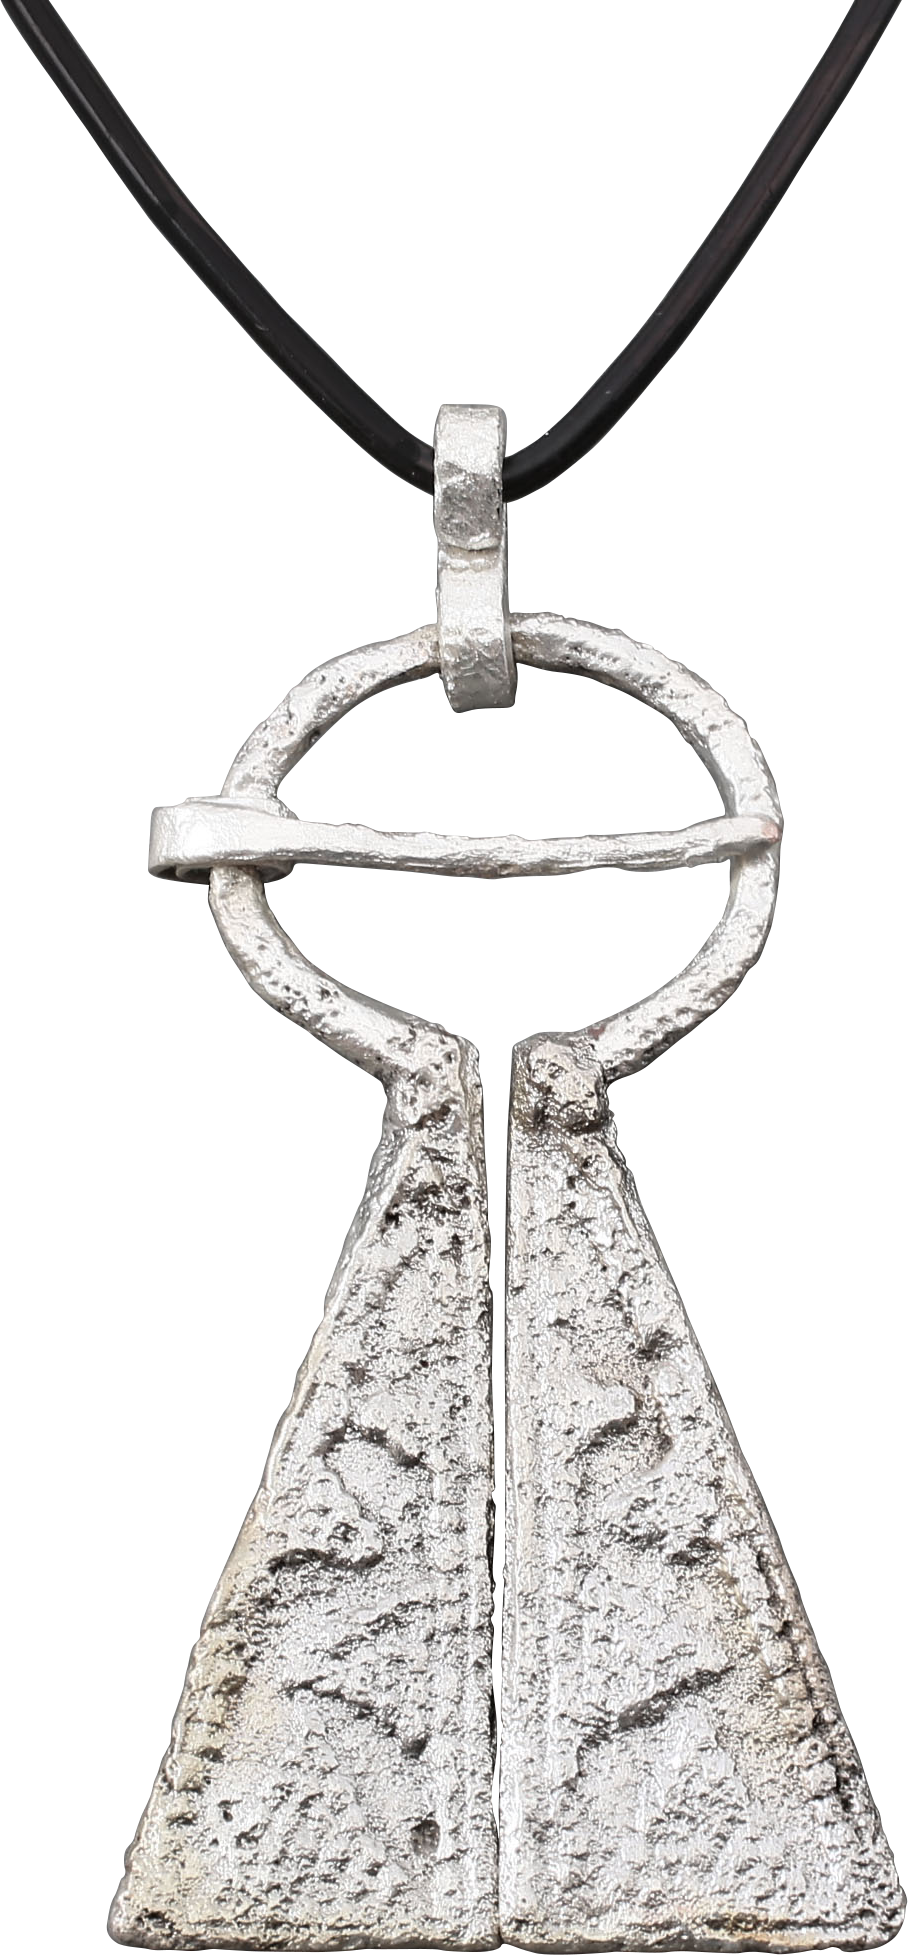 EXCEPTIONAL VIKING PROTECTIVE BROOCH, C.950-1050 AD - Fagan Arms